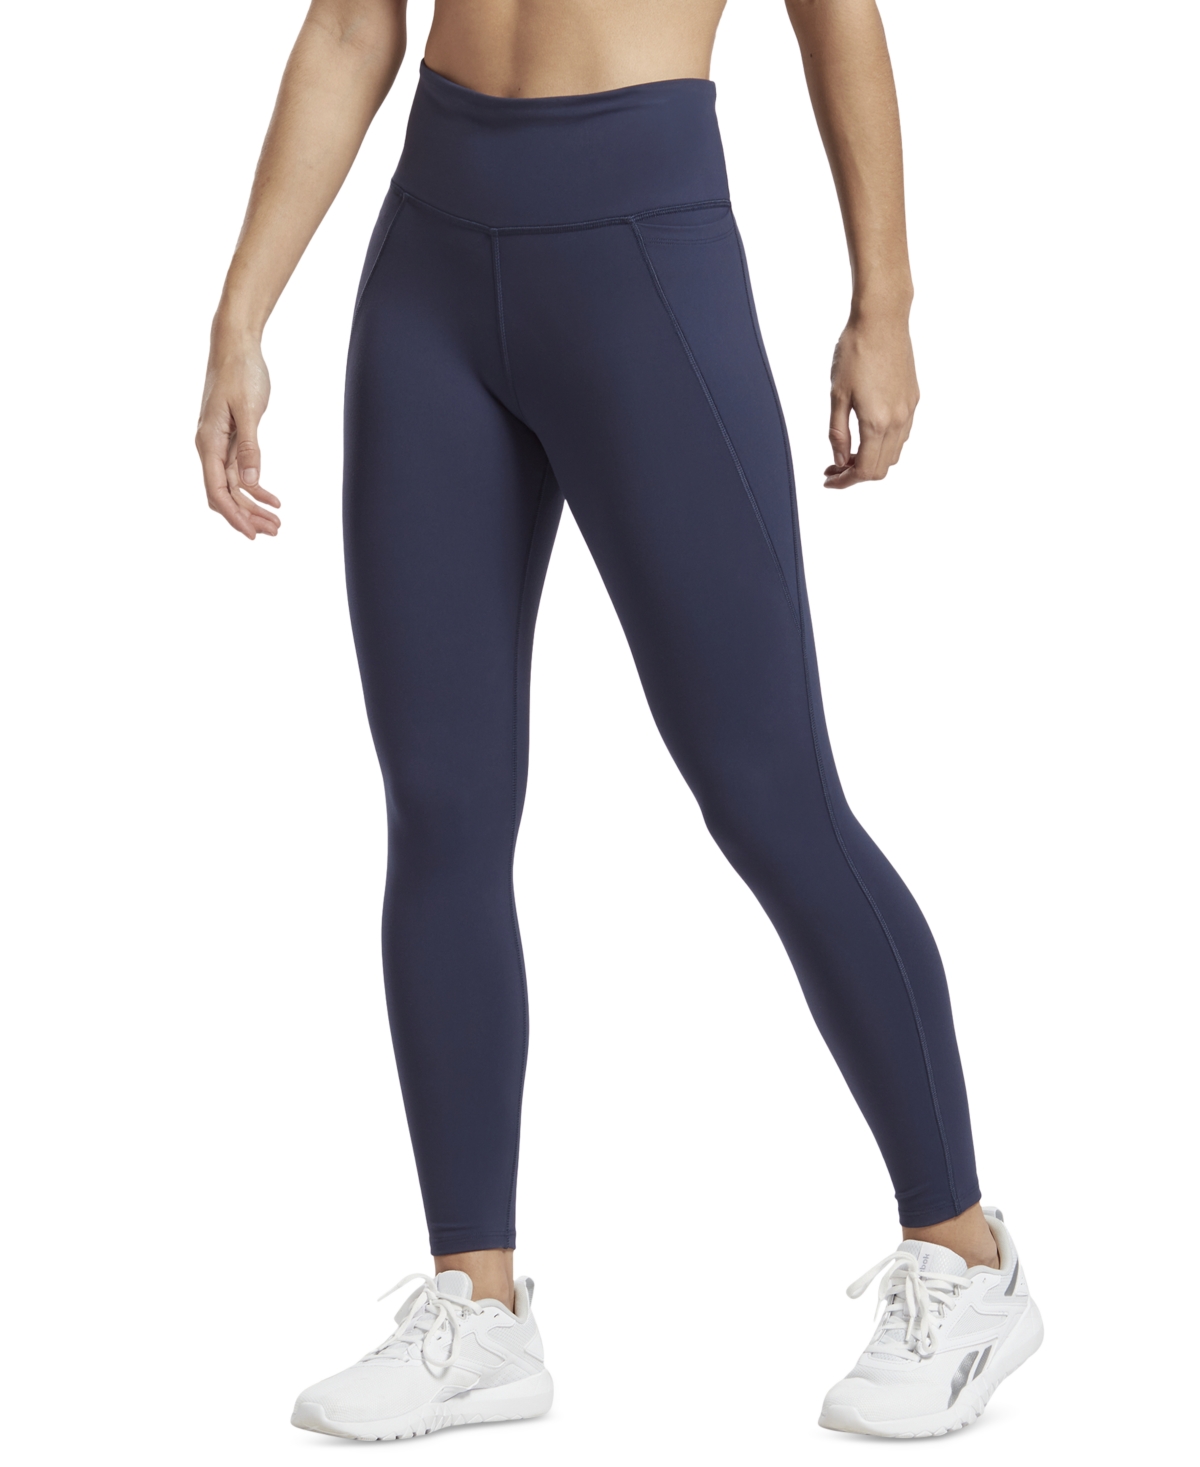 Shop Reebok Women's Lux High-waisted Pull-on Leggings, A Macy's Exclusive In Vector Navy